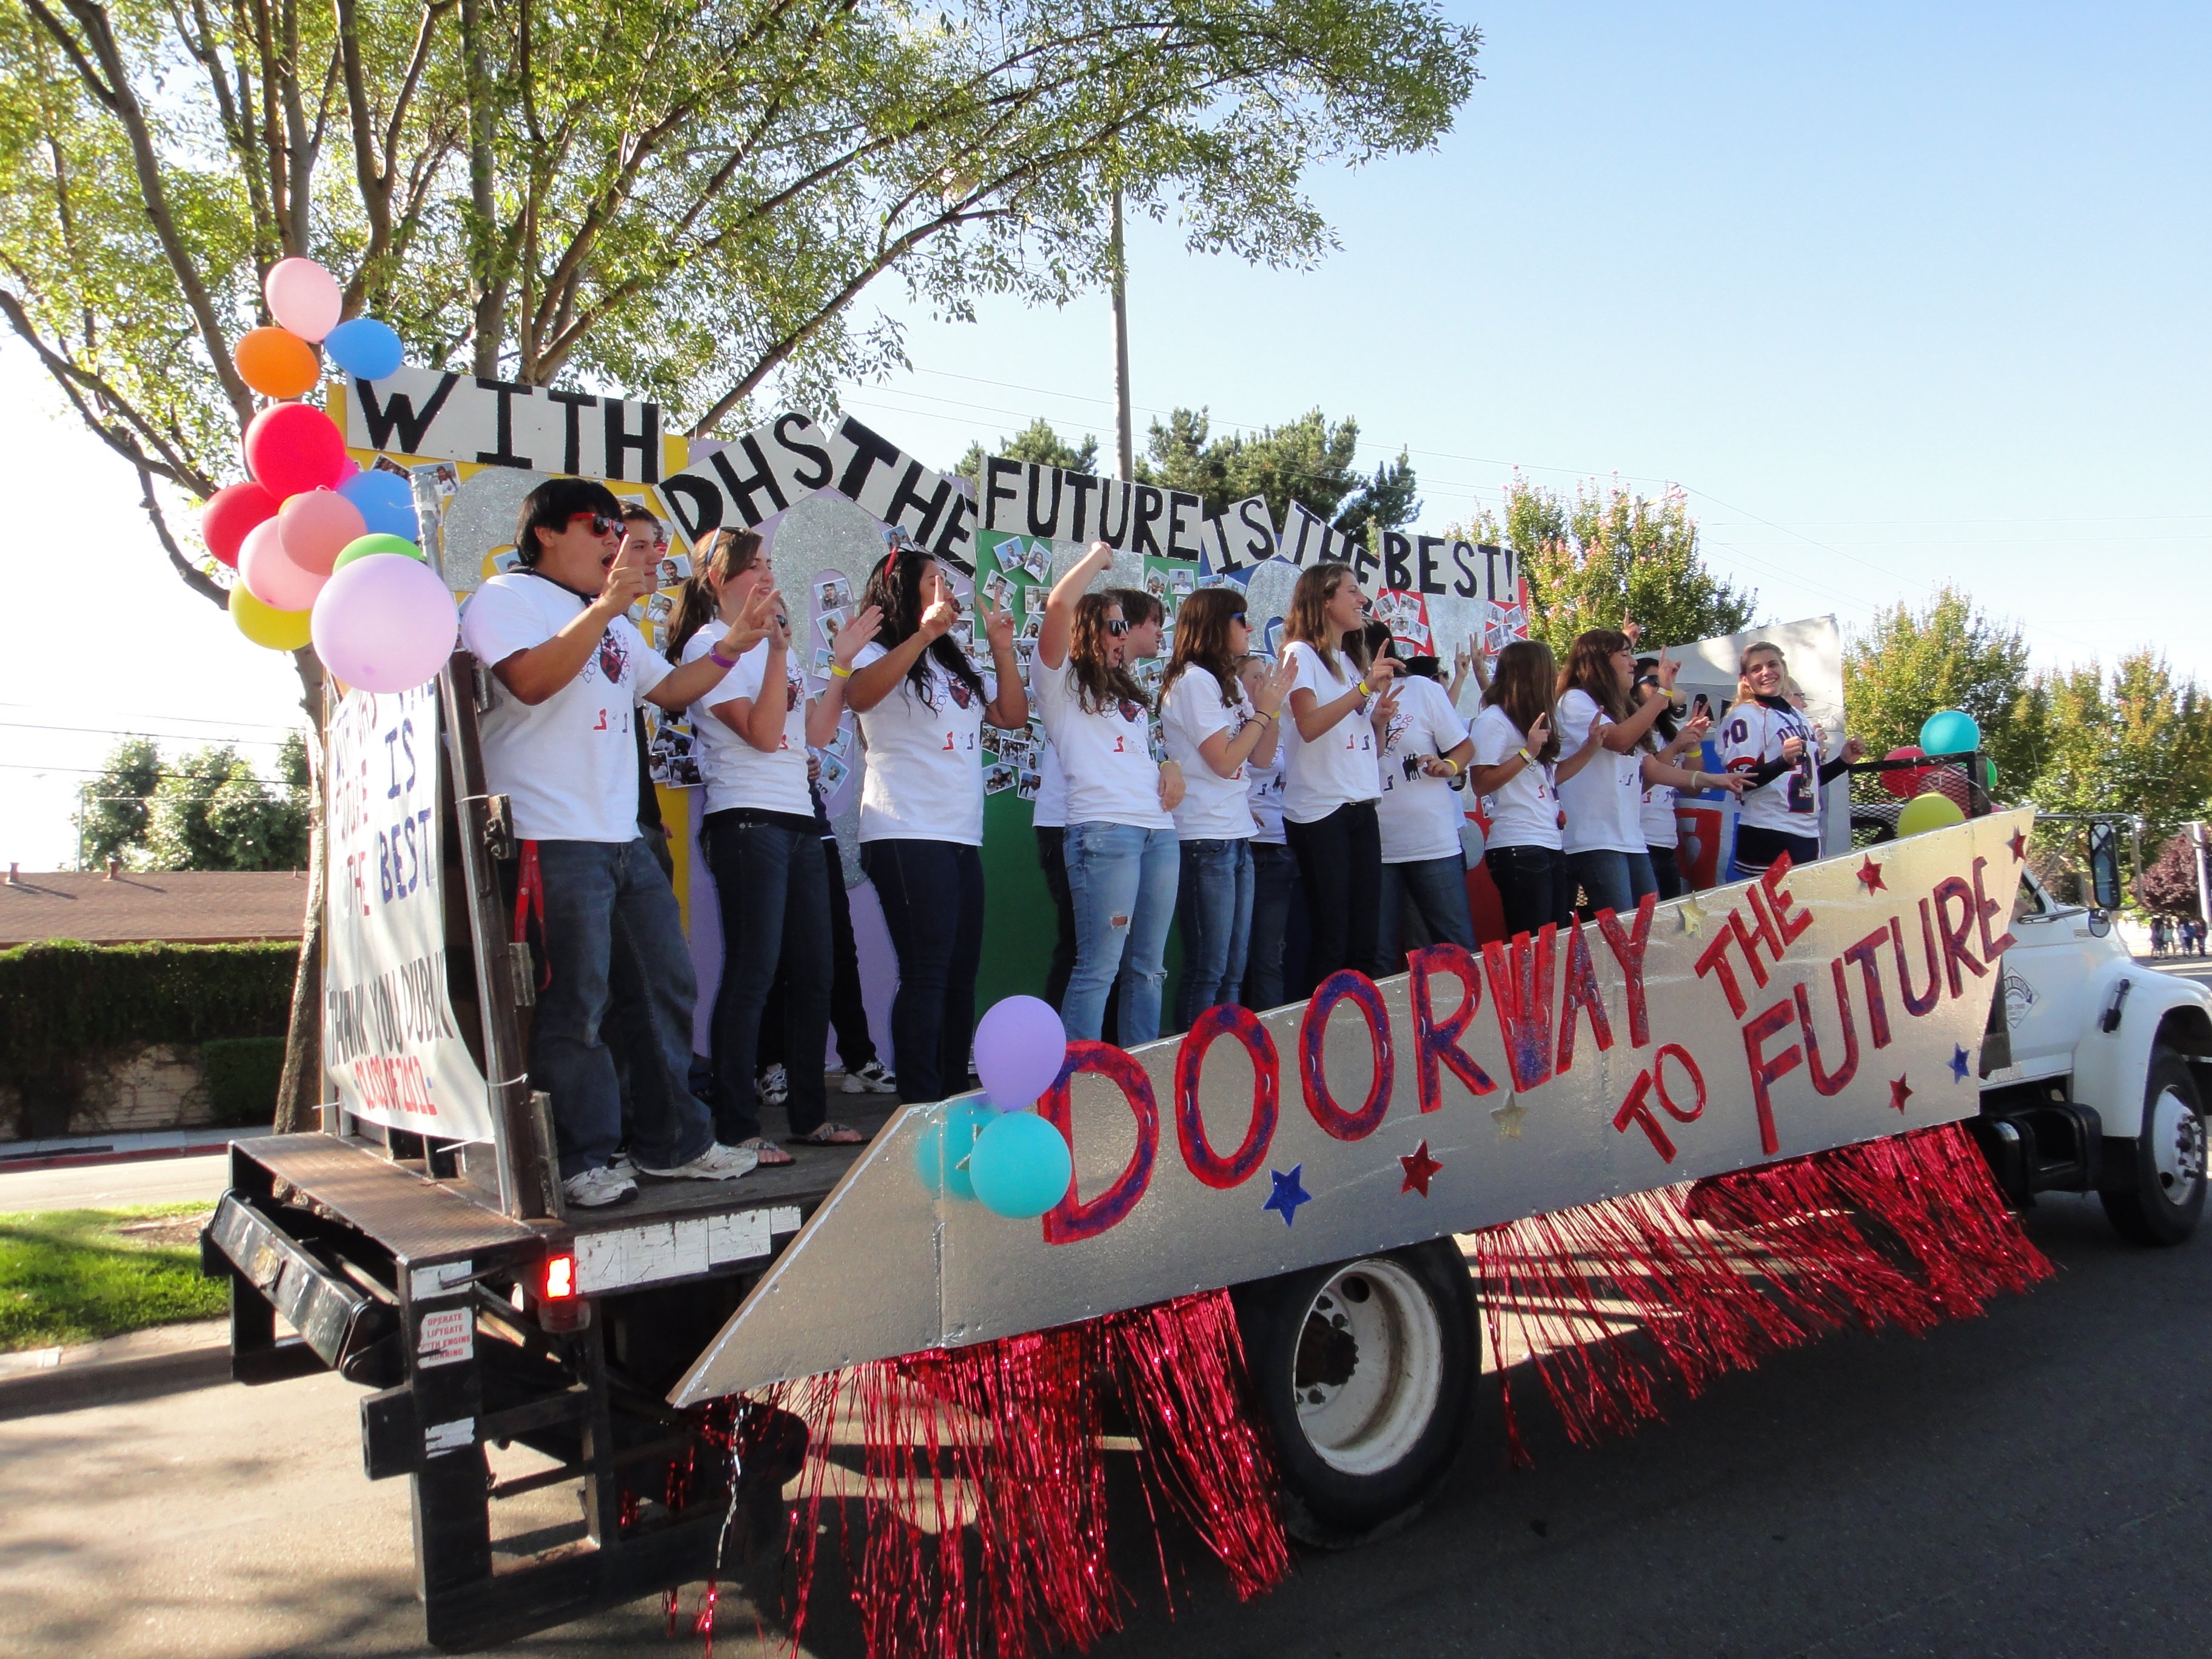 10 Gorgeous High School Homecoming Float Ideas dublin high school homecoming 2012 schedule of events onedublin 2022